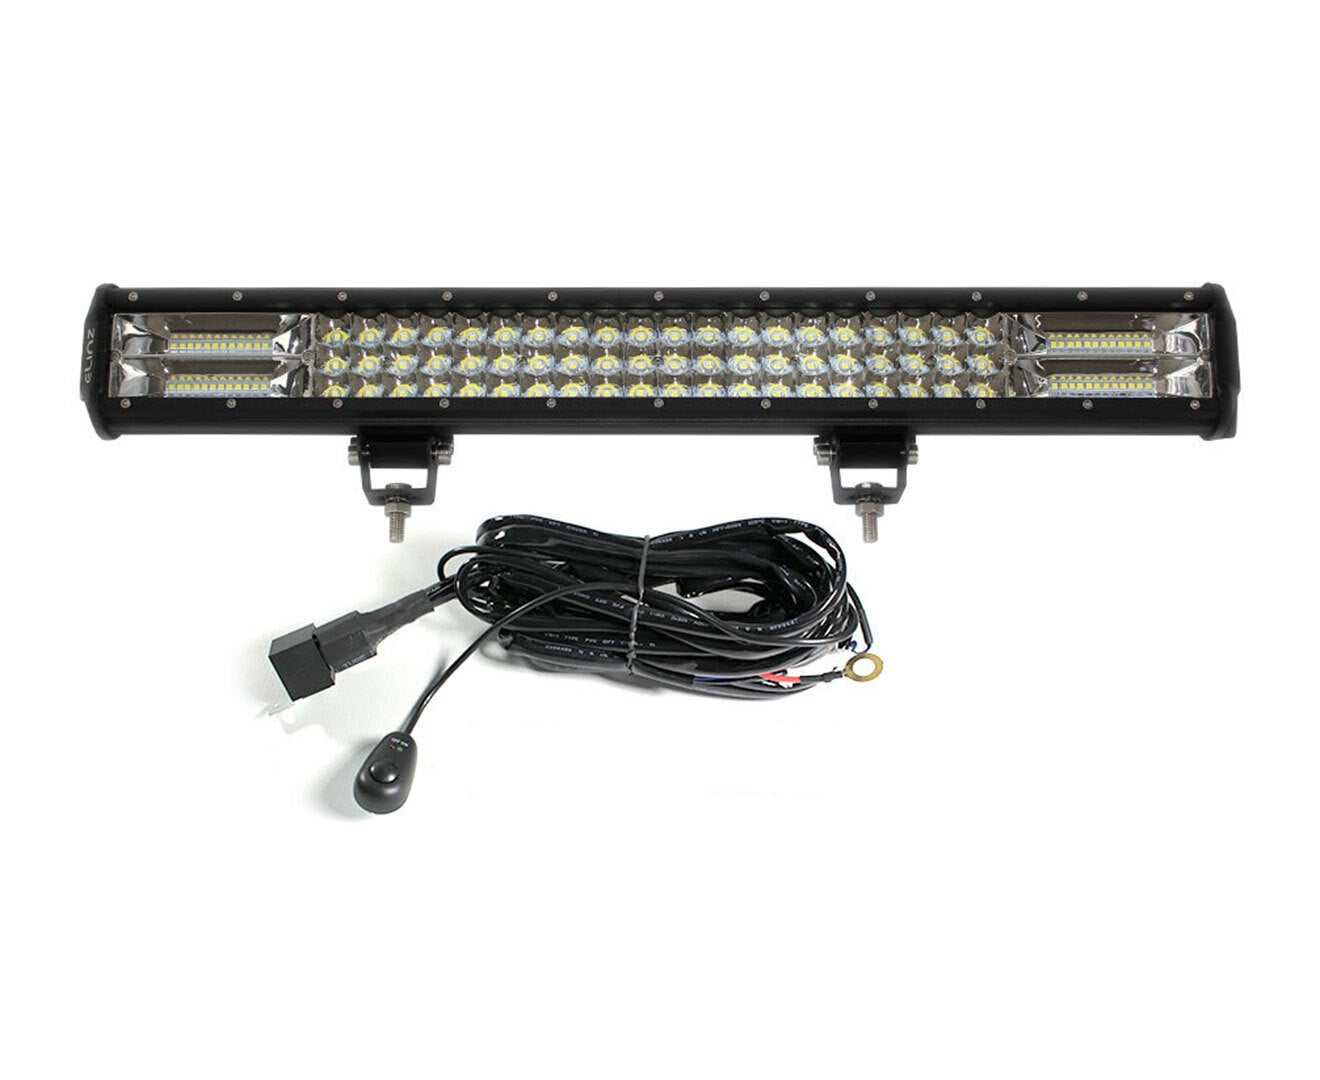 Elinz 23" inch LED Light Bar Work Driving Philips FLOOD SPOT COMBO Offroad 4WD 3 Rows